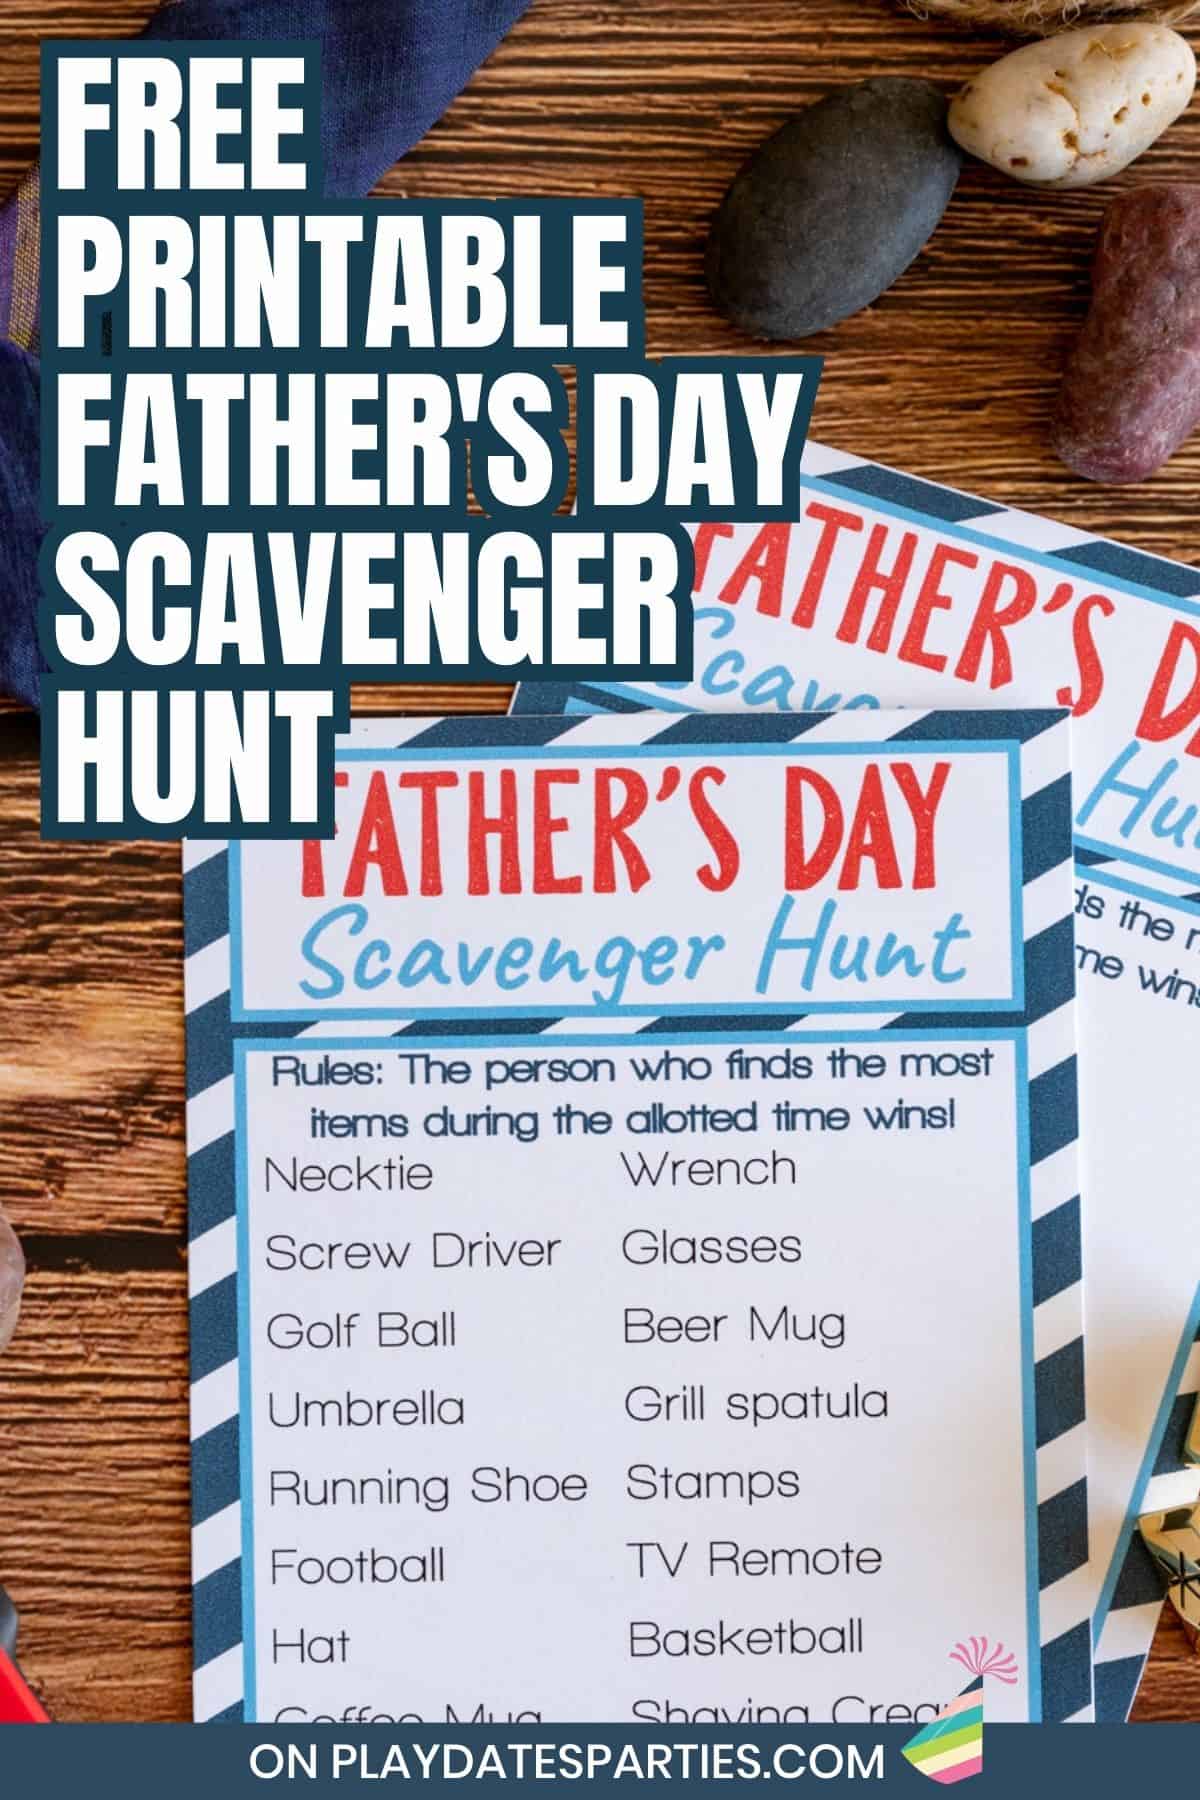 Free Printable Father's Day scavenger hunt Pin Image.